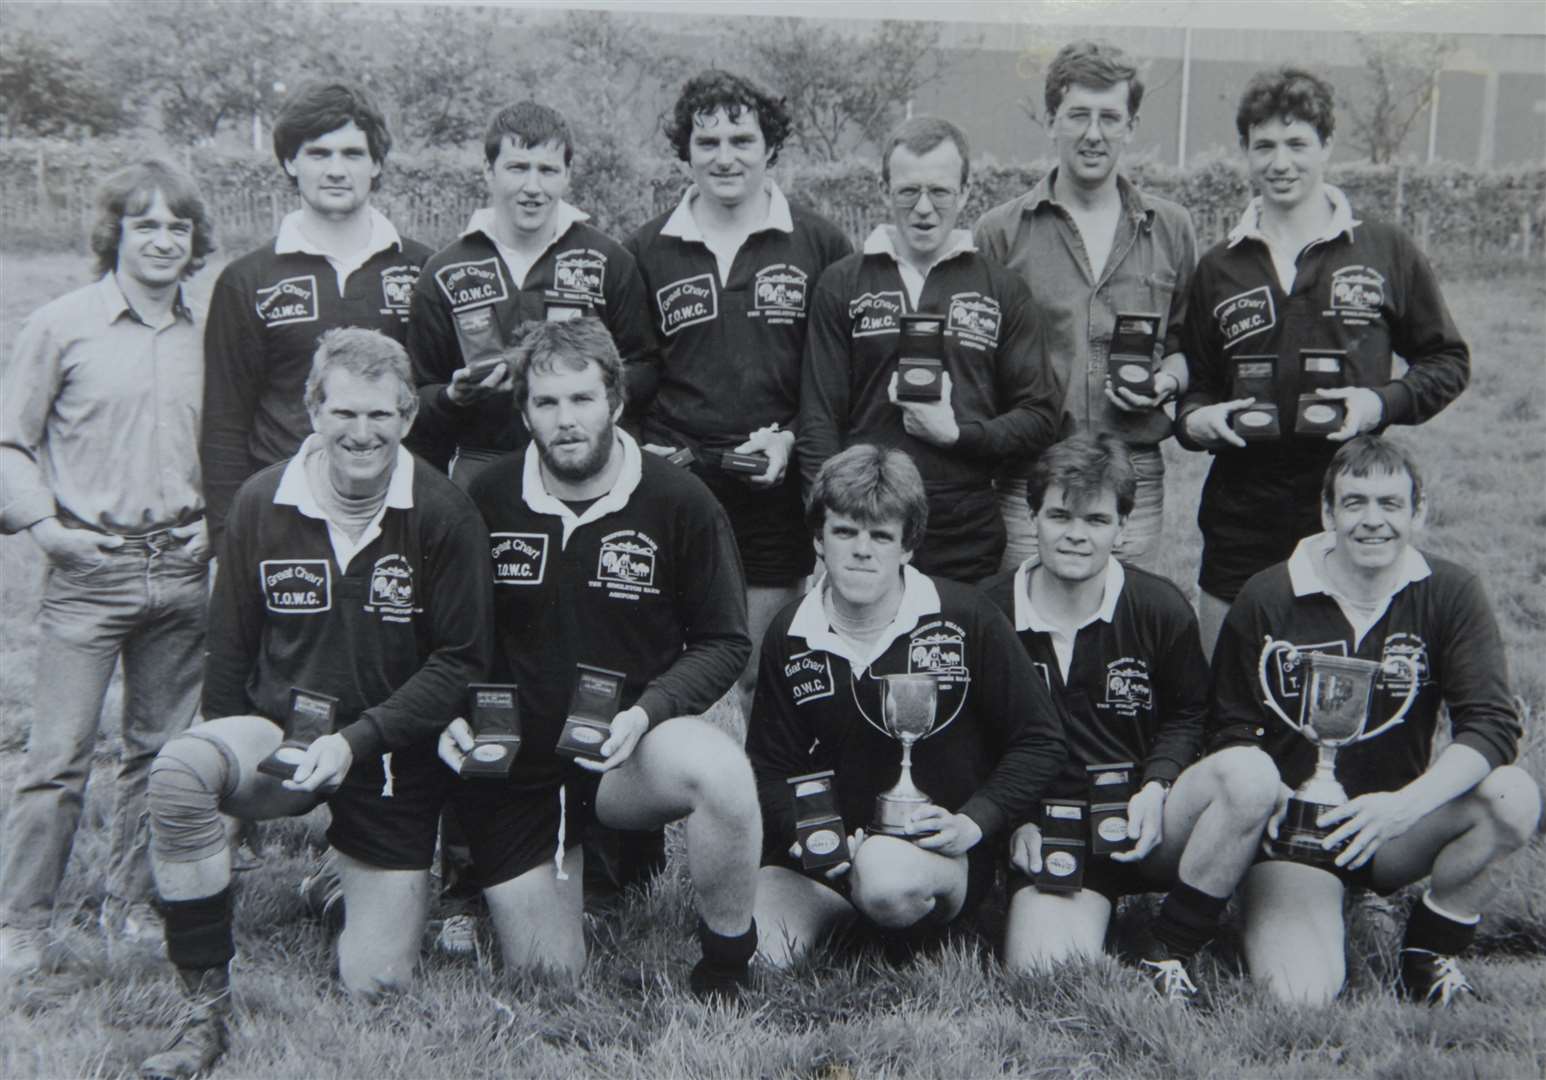 The Swan tug-of-war team of 1987; back row: Kenny Munchkin, Mark Henderson, Alan Young Hopper, Tom The Post, Hard Life, Posh Charles; front row: Vernon Gubb, Mark Cornell, Chris 'The Beast' Moore, Martin Reed, Big Dave Reed